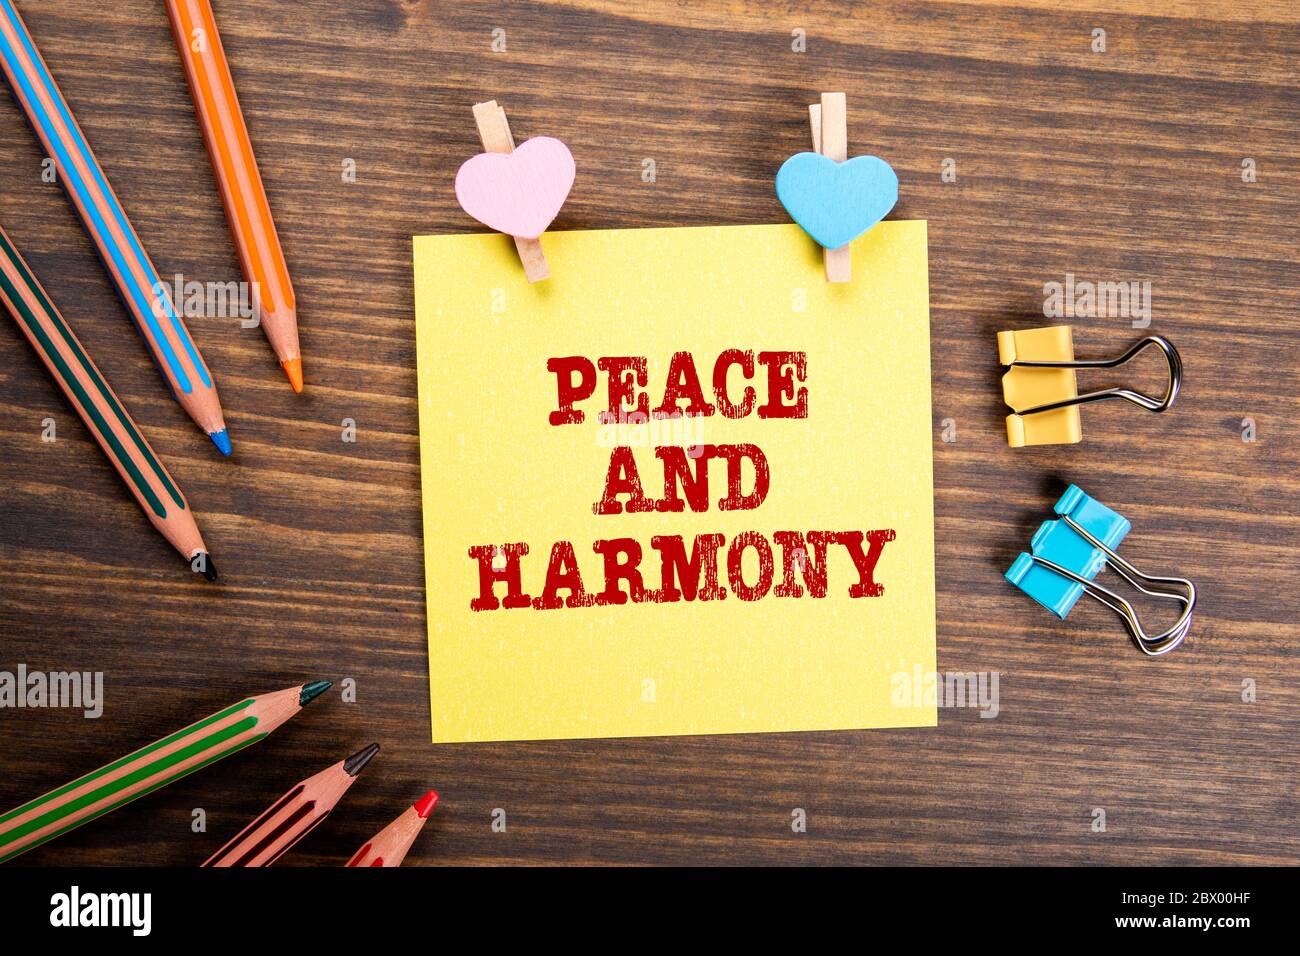 PEACE AND HARMONY. Communication, compromises, ethics and empathy concept. Wooden clips with heart and note on wooden table Stock Photo